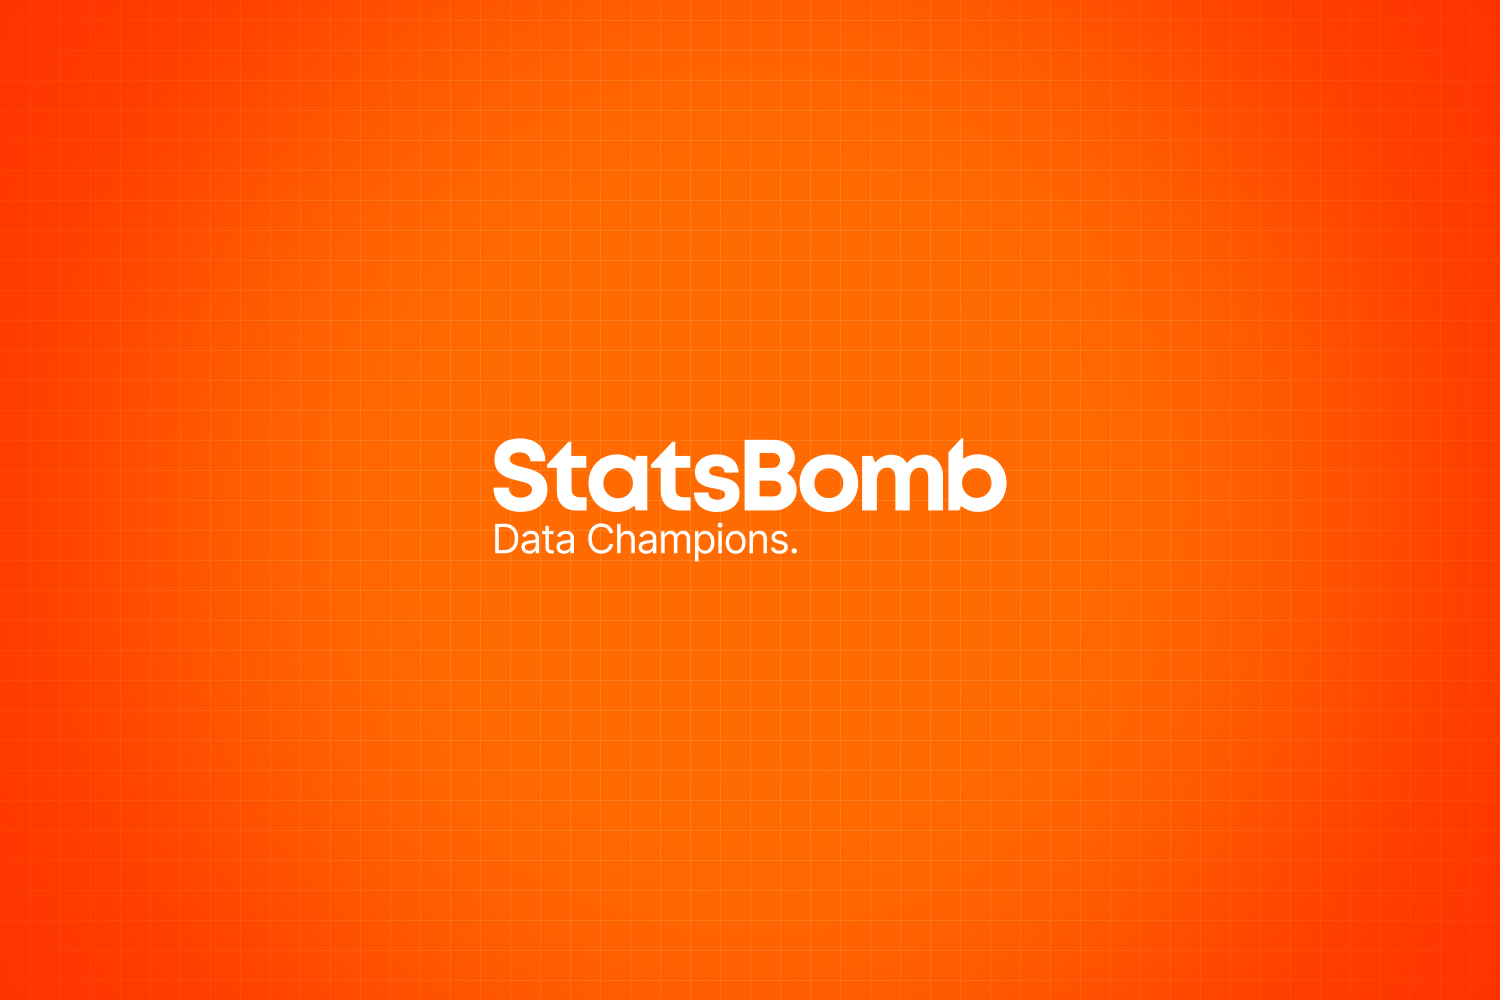 Houston Dynamo FC Become The Latest MLS Team To Sign Partnership With StatsBomb